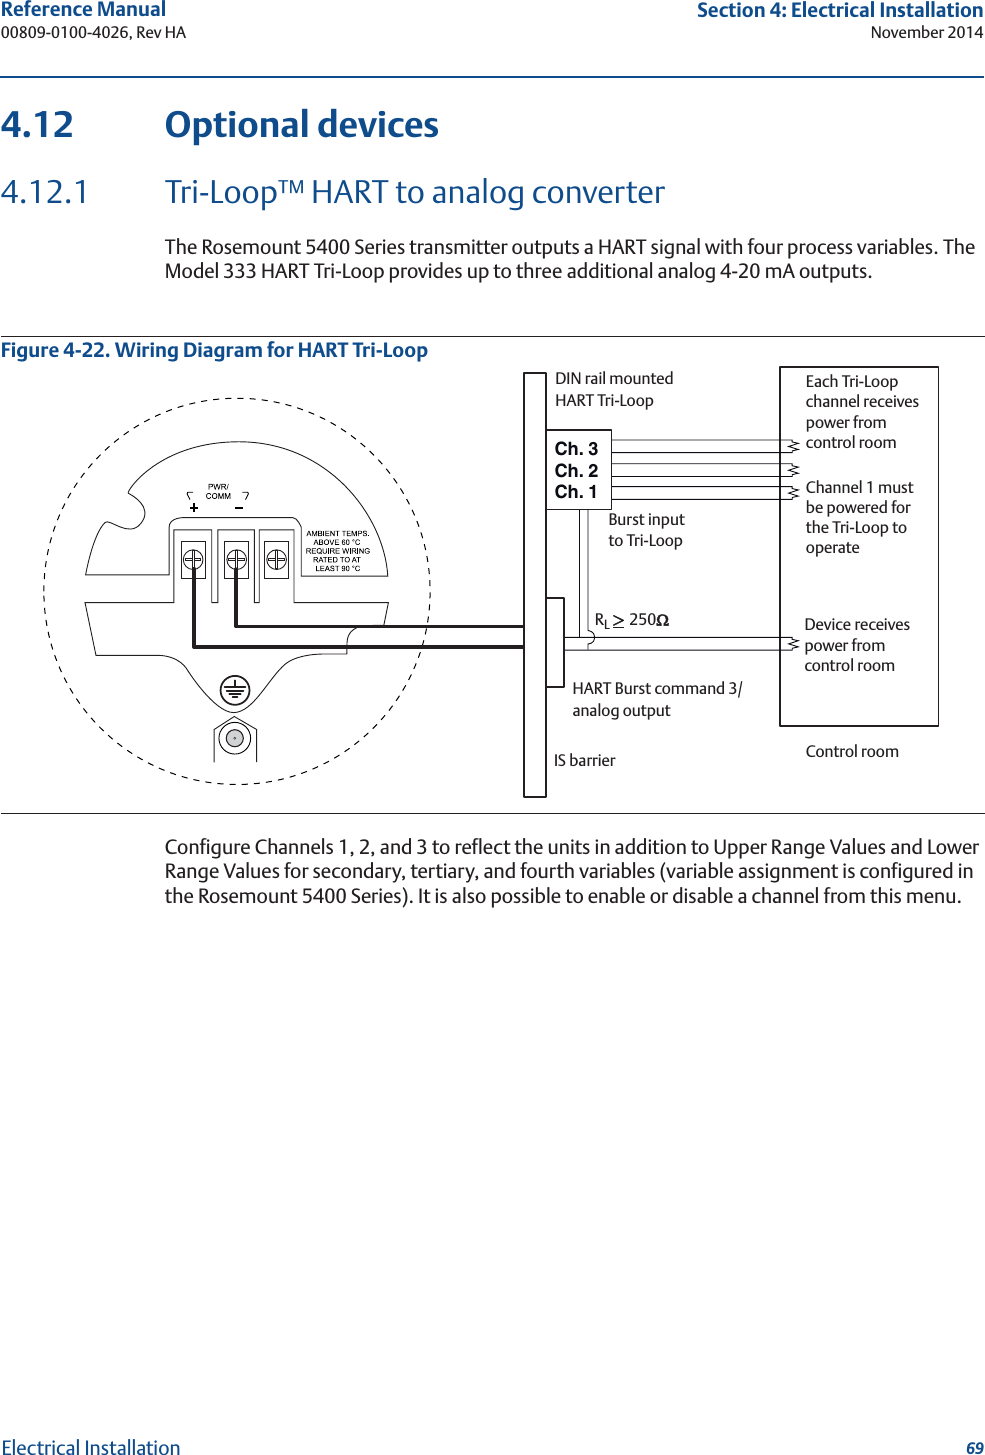 69Reference Manual 00809-0100-4026, Rev HASection 4: Electrical InstallationNovember 2014Electrical Installation4.12 Optional devices4.12.1 Tri-Loop™ HART to analog converterThe Rosemount 5400 Series transmitter outputs a HART signal with four process variables. The Model 333 HART Tri-Loop provides up to three additional analog 4-20 mA outputs.Figure 4-22. Wiring Diagram for HART Tri-LoopConfigure Channels 1, 2, and 3 to reflect the units in addition to Upper Range Values and Lower Range Values for secondary, tertiary, and fourth variables (variable assignment is configured in the Rosemount 5400 Series). It is also possible to enable or disable a channel from this menu.Ch. 3Ch. 2Ch. 1Each Tri-Loop channel receives power from control roomChannel 1 must be powered for the Tri-Loop to operateDevice receives power from control roomRL !250:HART Burst command 3/analog outputIS barrierDIN rail mountedHART Tri-LoopControl roomBurst input to Tri-Loop